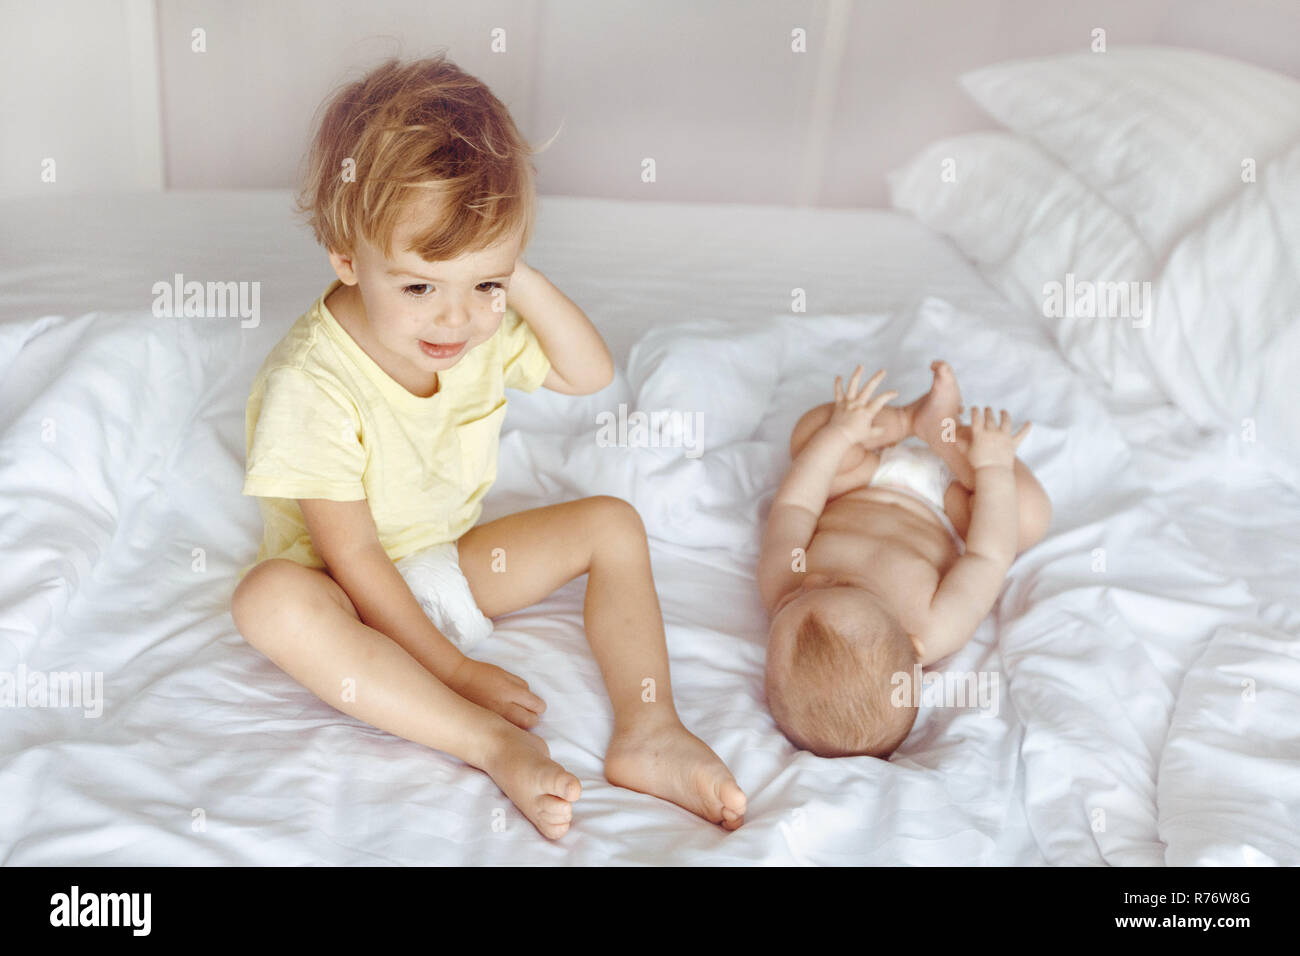 Kid sitting on bed near infant Stock Photo